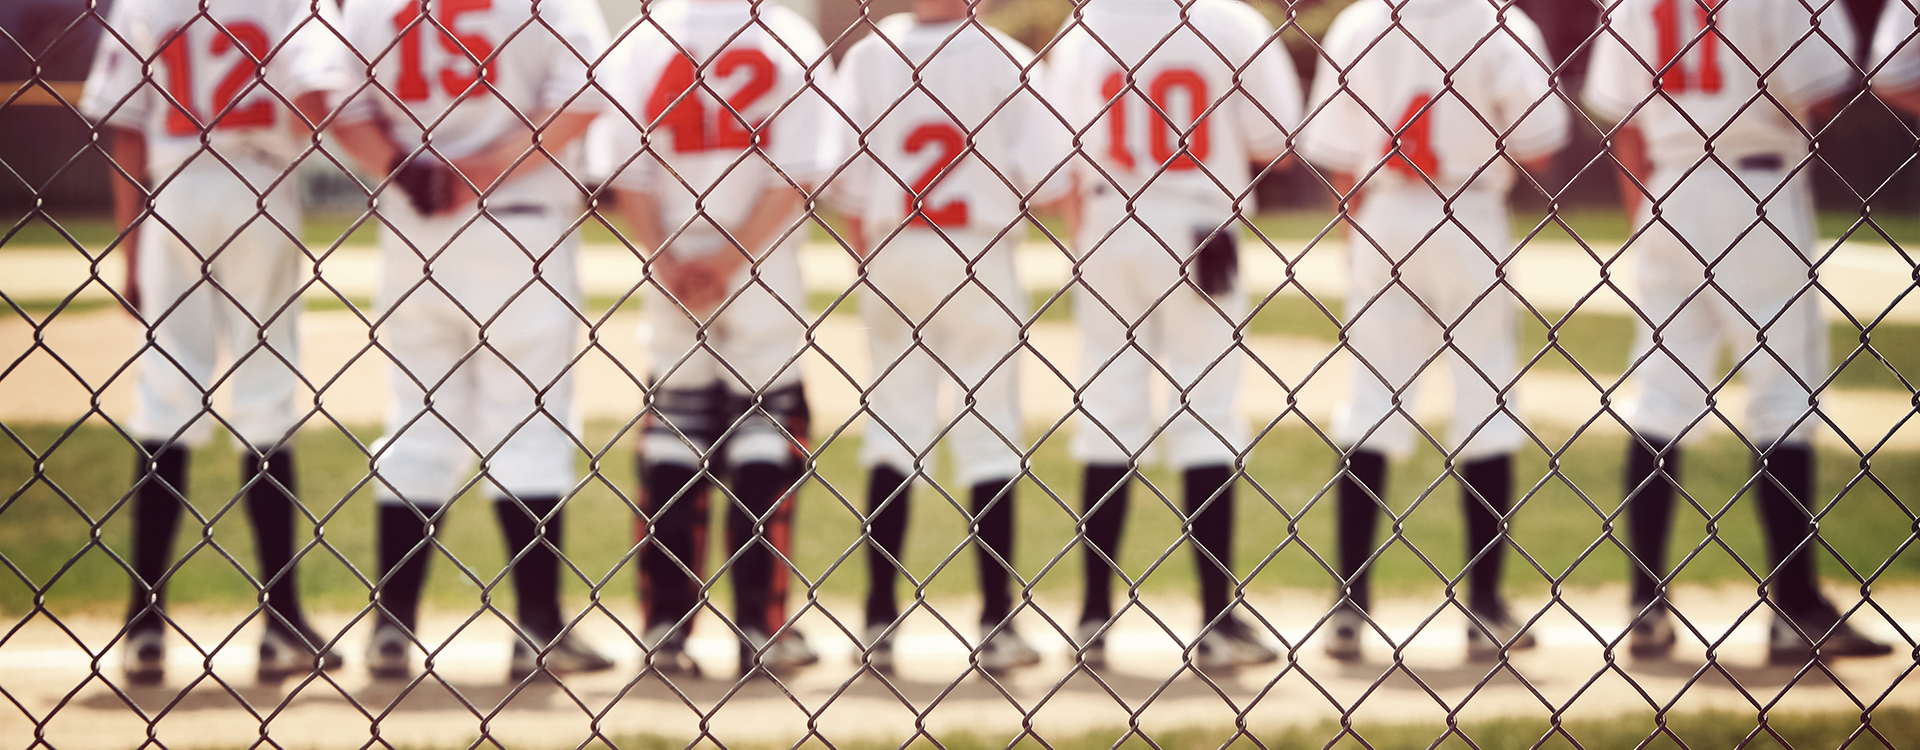 Blurred youth baseball background, children in a row at the begi